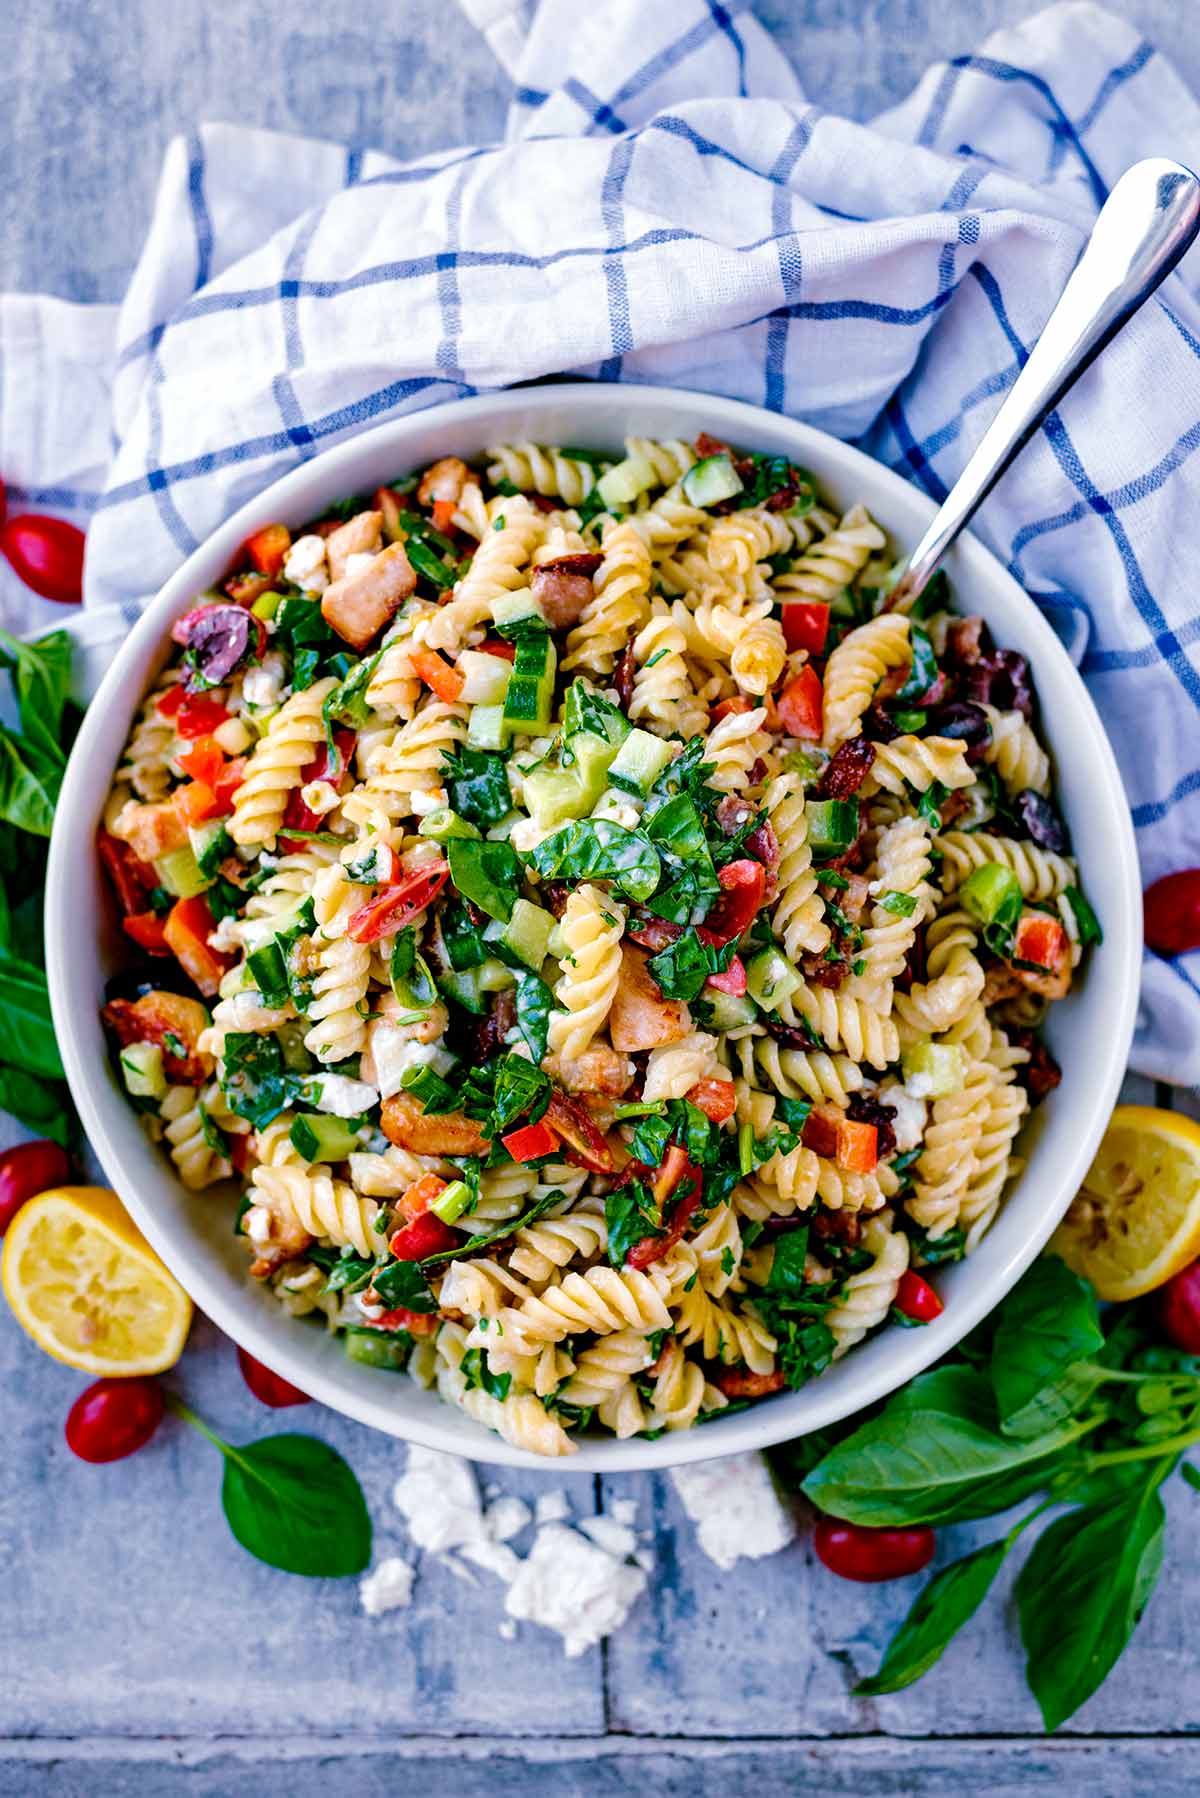 A large bowl of Chicken Pasta Salad next to a checked towel.